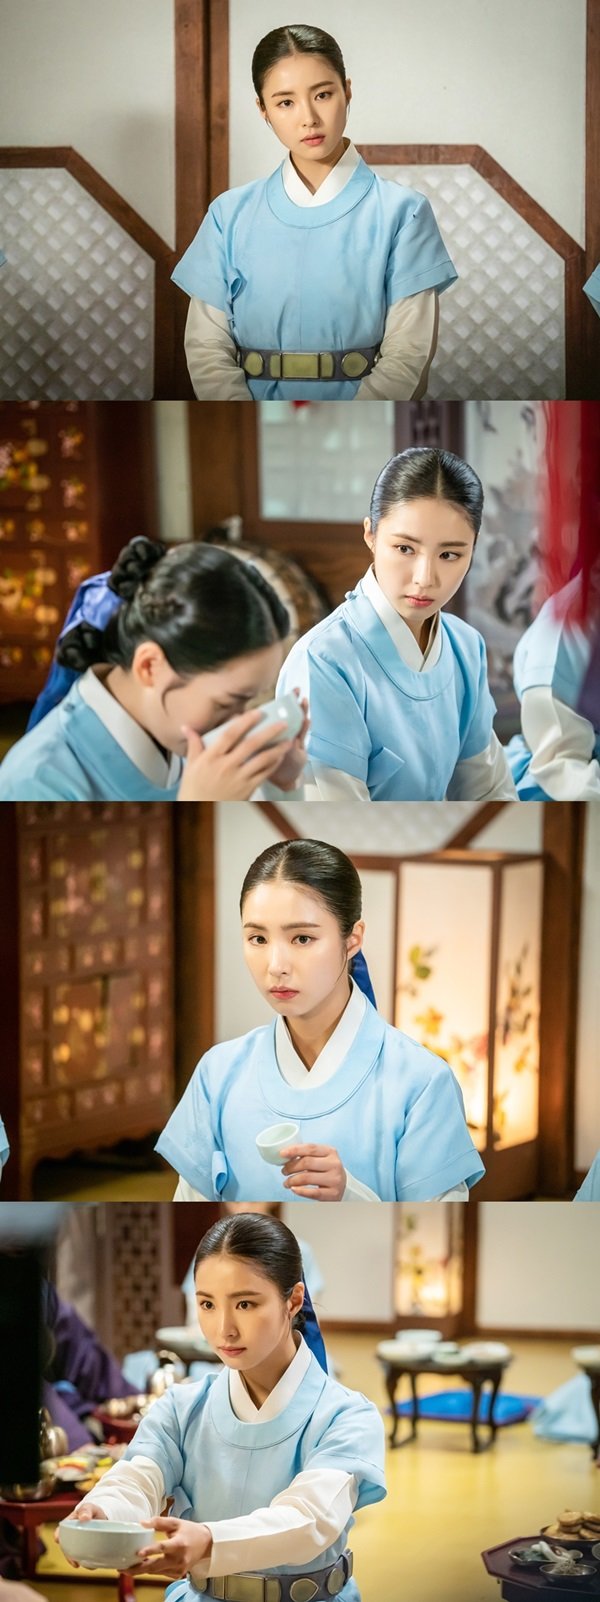 Shin Se-kyung made a small meeting about the scene of the scene of the new cadet in Na Hae-ryung.MBC Na Hae-ryung takes the throne of the drama drama and shows the power of Shin Se-kyungs historical drama.In the play, Shin Se-kyung is playing a hot role as the only Ada Lovelace () former Na Hae-ryung of Joseon who plant precious seeds of change.Especially in the last broadcast, the scene of the scene of the scene of the ritual was the hottest response of viewers.Na Hae-ryung (Shin Se-kyung) and Ada Lovelace who thought that the reasonless housework of senior officers in the play was not a ritual.In the prepared ritual, Na Hae-ryung performed endless masterpieces with the execution (Huh Jeong-do) saying that he would return the love of his seniors, and as a result, he won the victory.Na Hae-ryungs full-fledged aspect of saying this was enough to give a cool cider-like excitement.Shin Se-kyung said, It is a scene that I was able to shoot freely thanks to my seniors and fellow actors who breathed together. Na Hae-ryung was worried about the fact that he liked drinking and drinking well.So I think it was a party, not a fight, for Na Hae-ryung, he said. I thought that the scene of the ritual was an opportunity to show a little different from the one that the character always showed in the drama.It is noteworthy that Shin Se-kyungs performance and presence, which shines as the society continues, will create another scene.